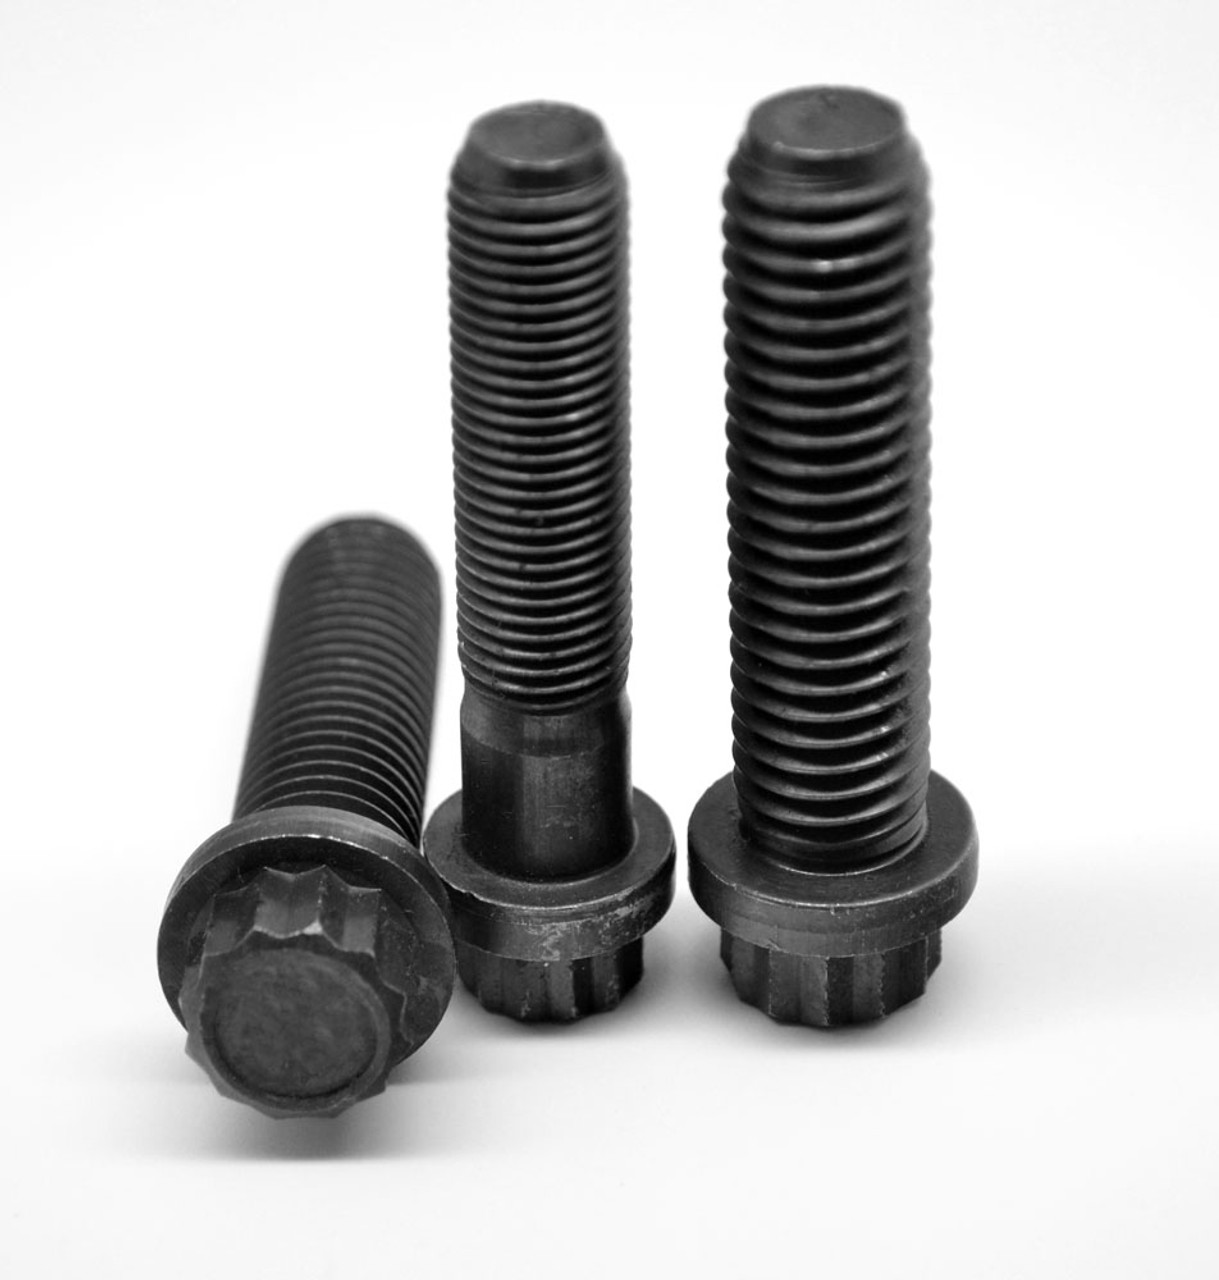 7/8-9 x 4 Coarse Thread 12-Point Flange Screw Alloy Steel Thermal Black Oxide